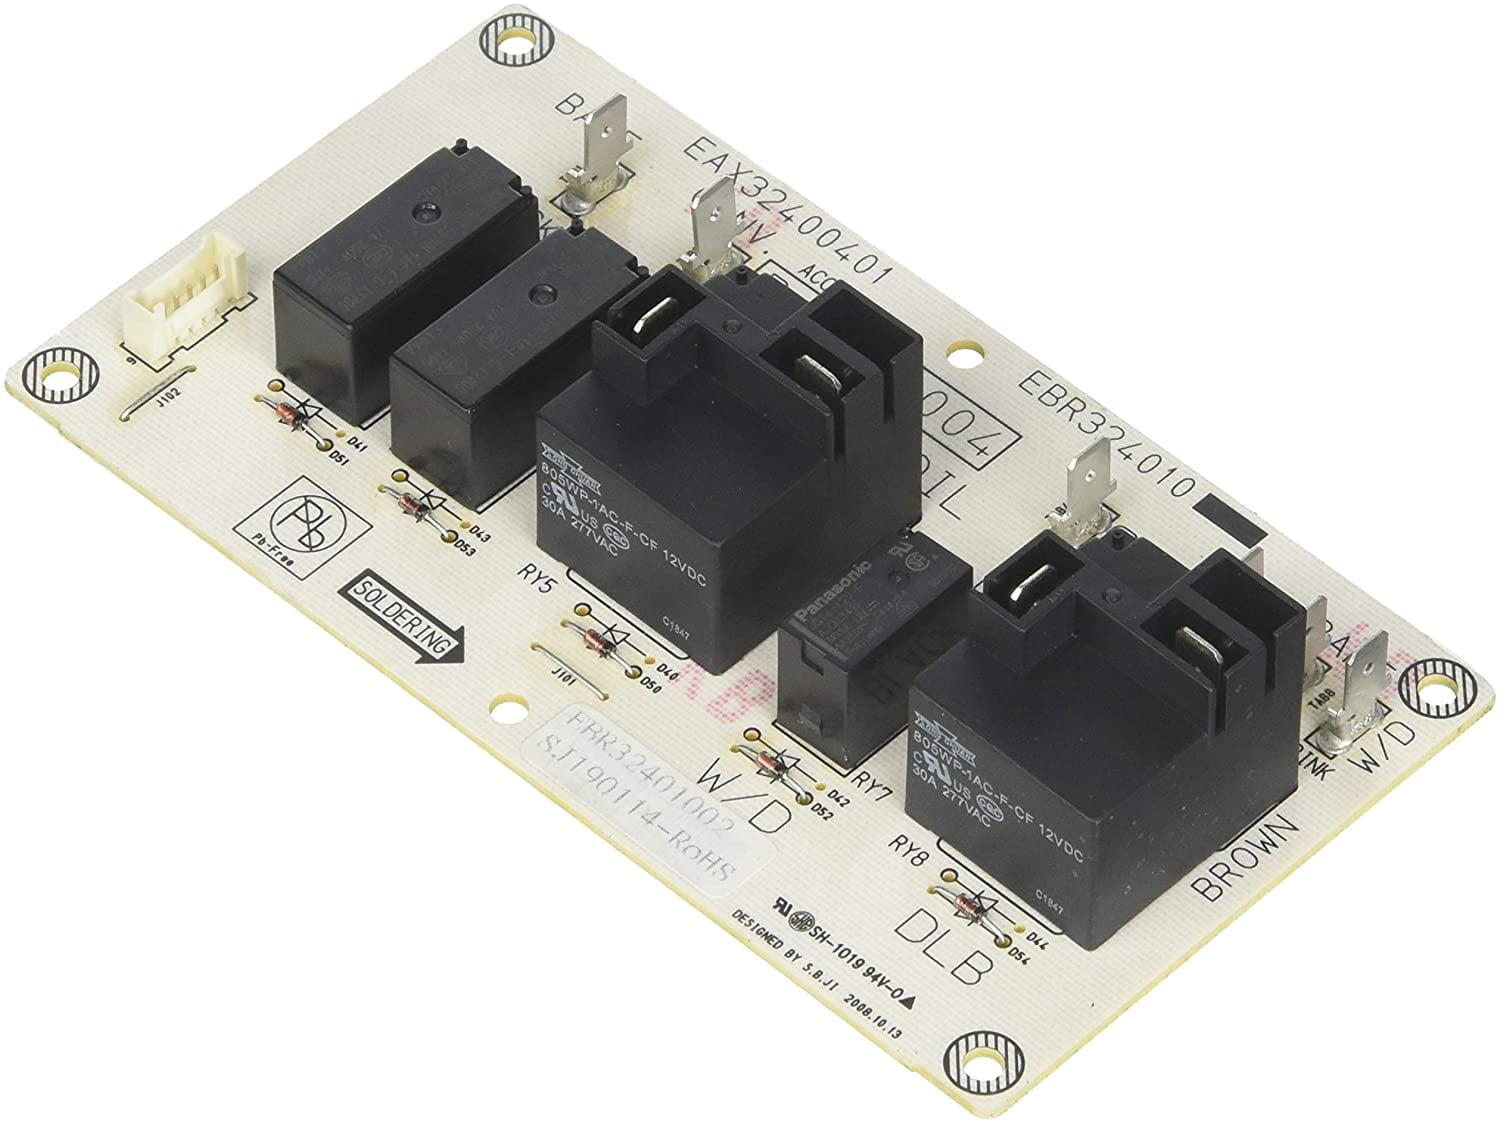 6871W1N012A LG Range Oven Control Board for sale online 